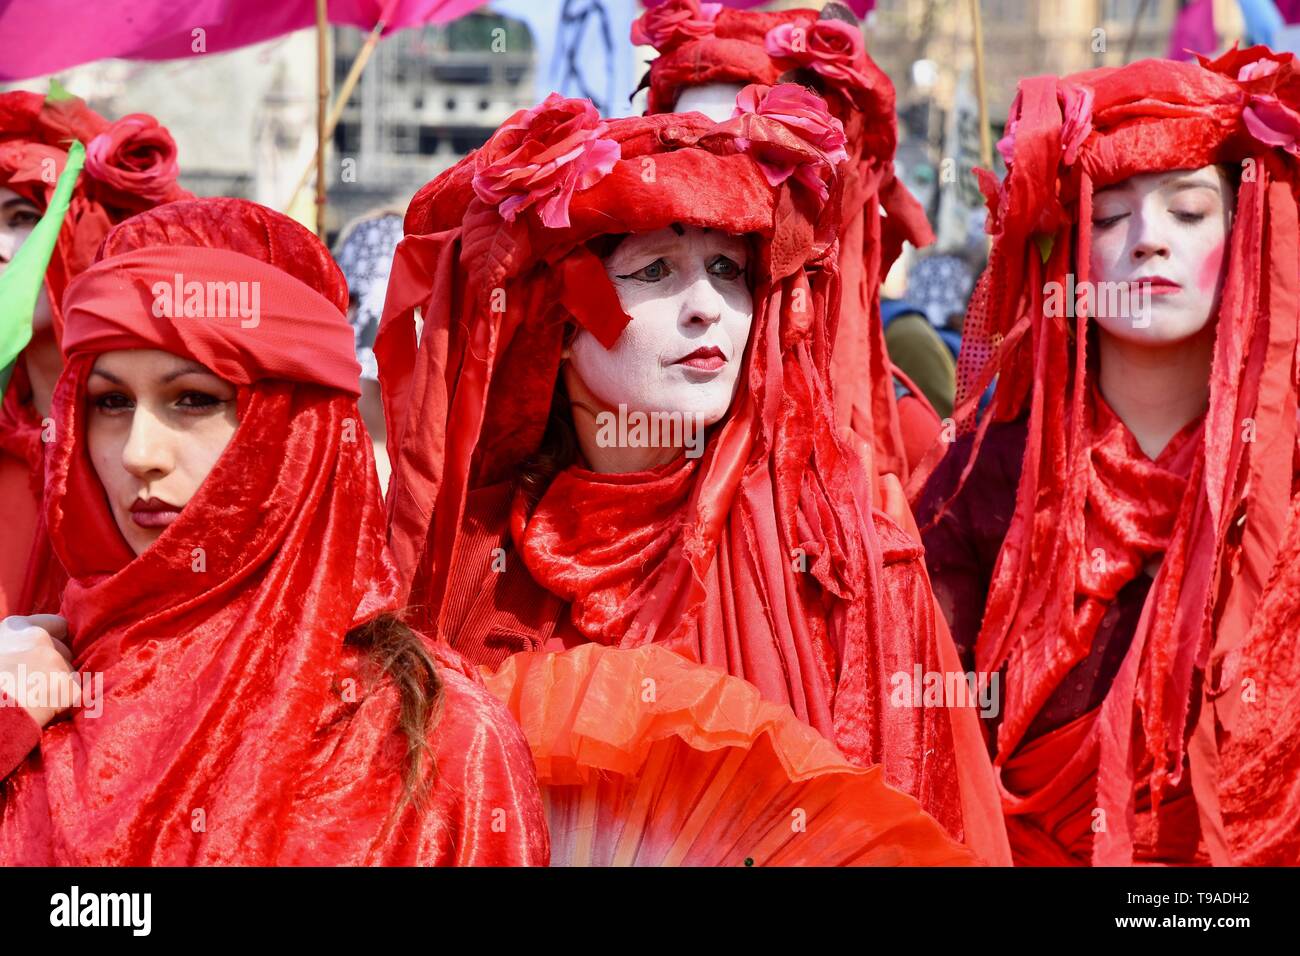 Blood of the Extinction Theatrical Group, Extinction Rebellion Climate Change Protest, Parliament Square, London Stock Photo